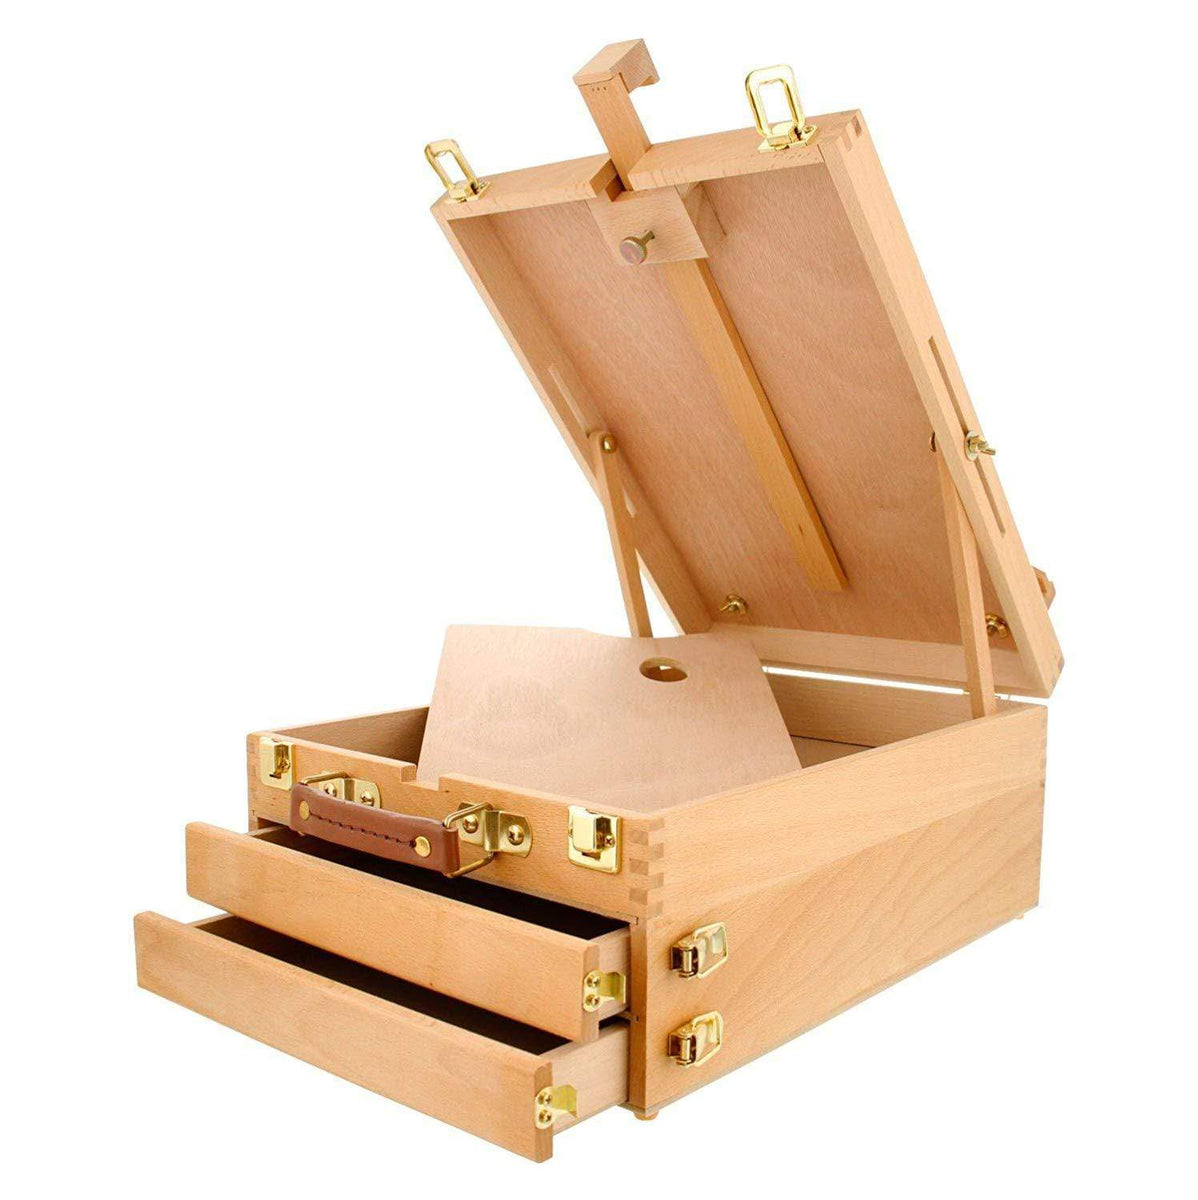 Portable Wooden Sketch Box Easel Drawing Painting Tabletop Easels Art Supply